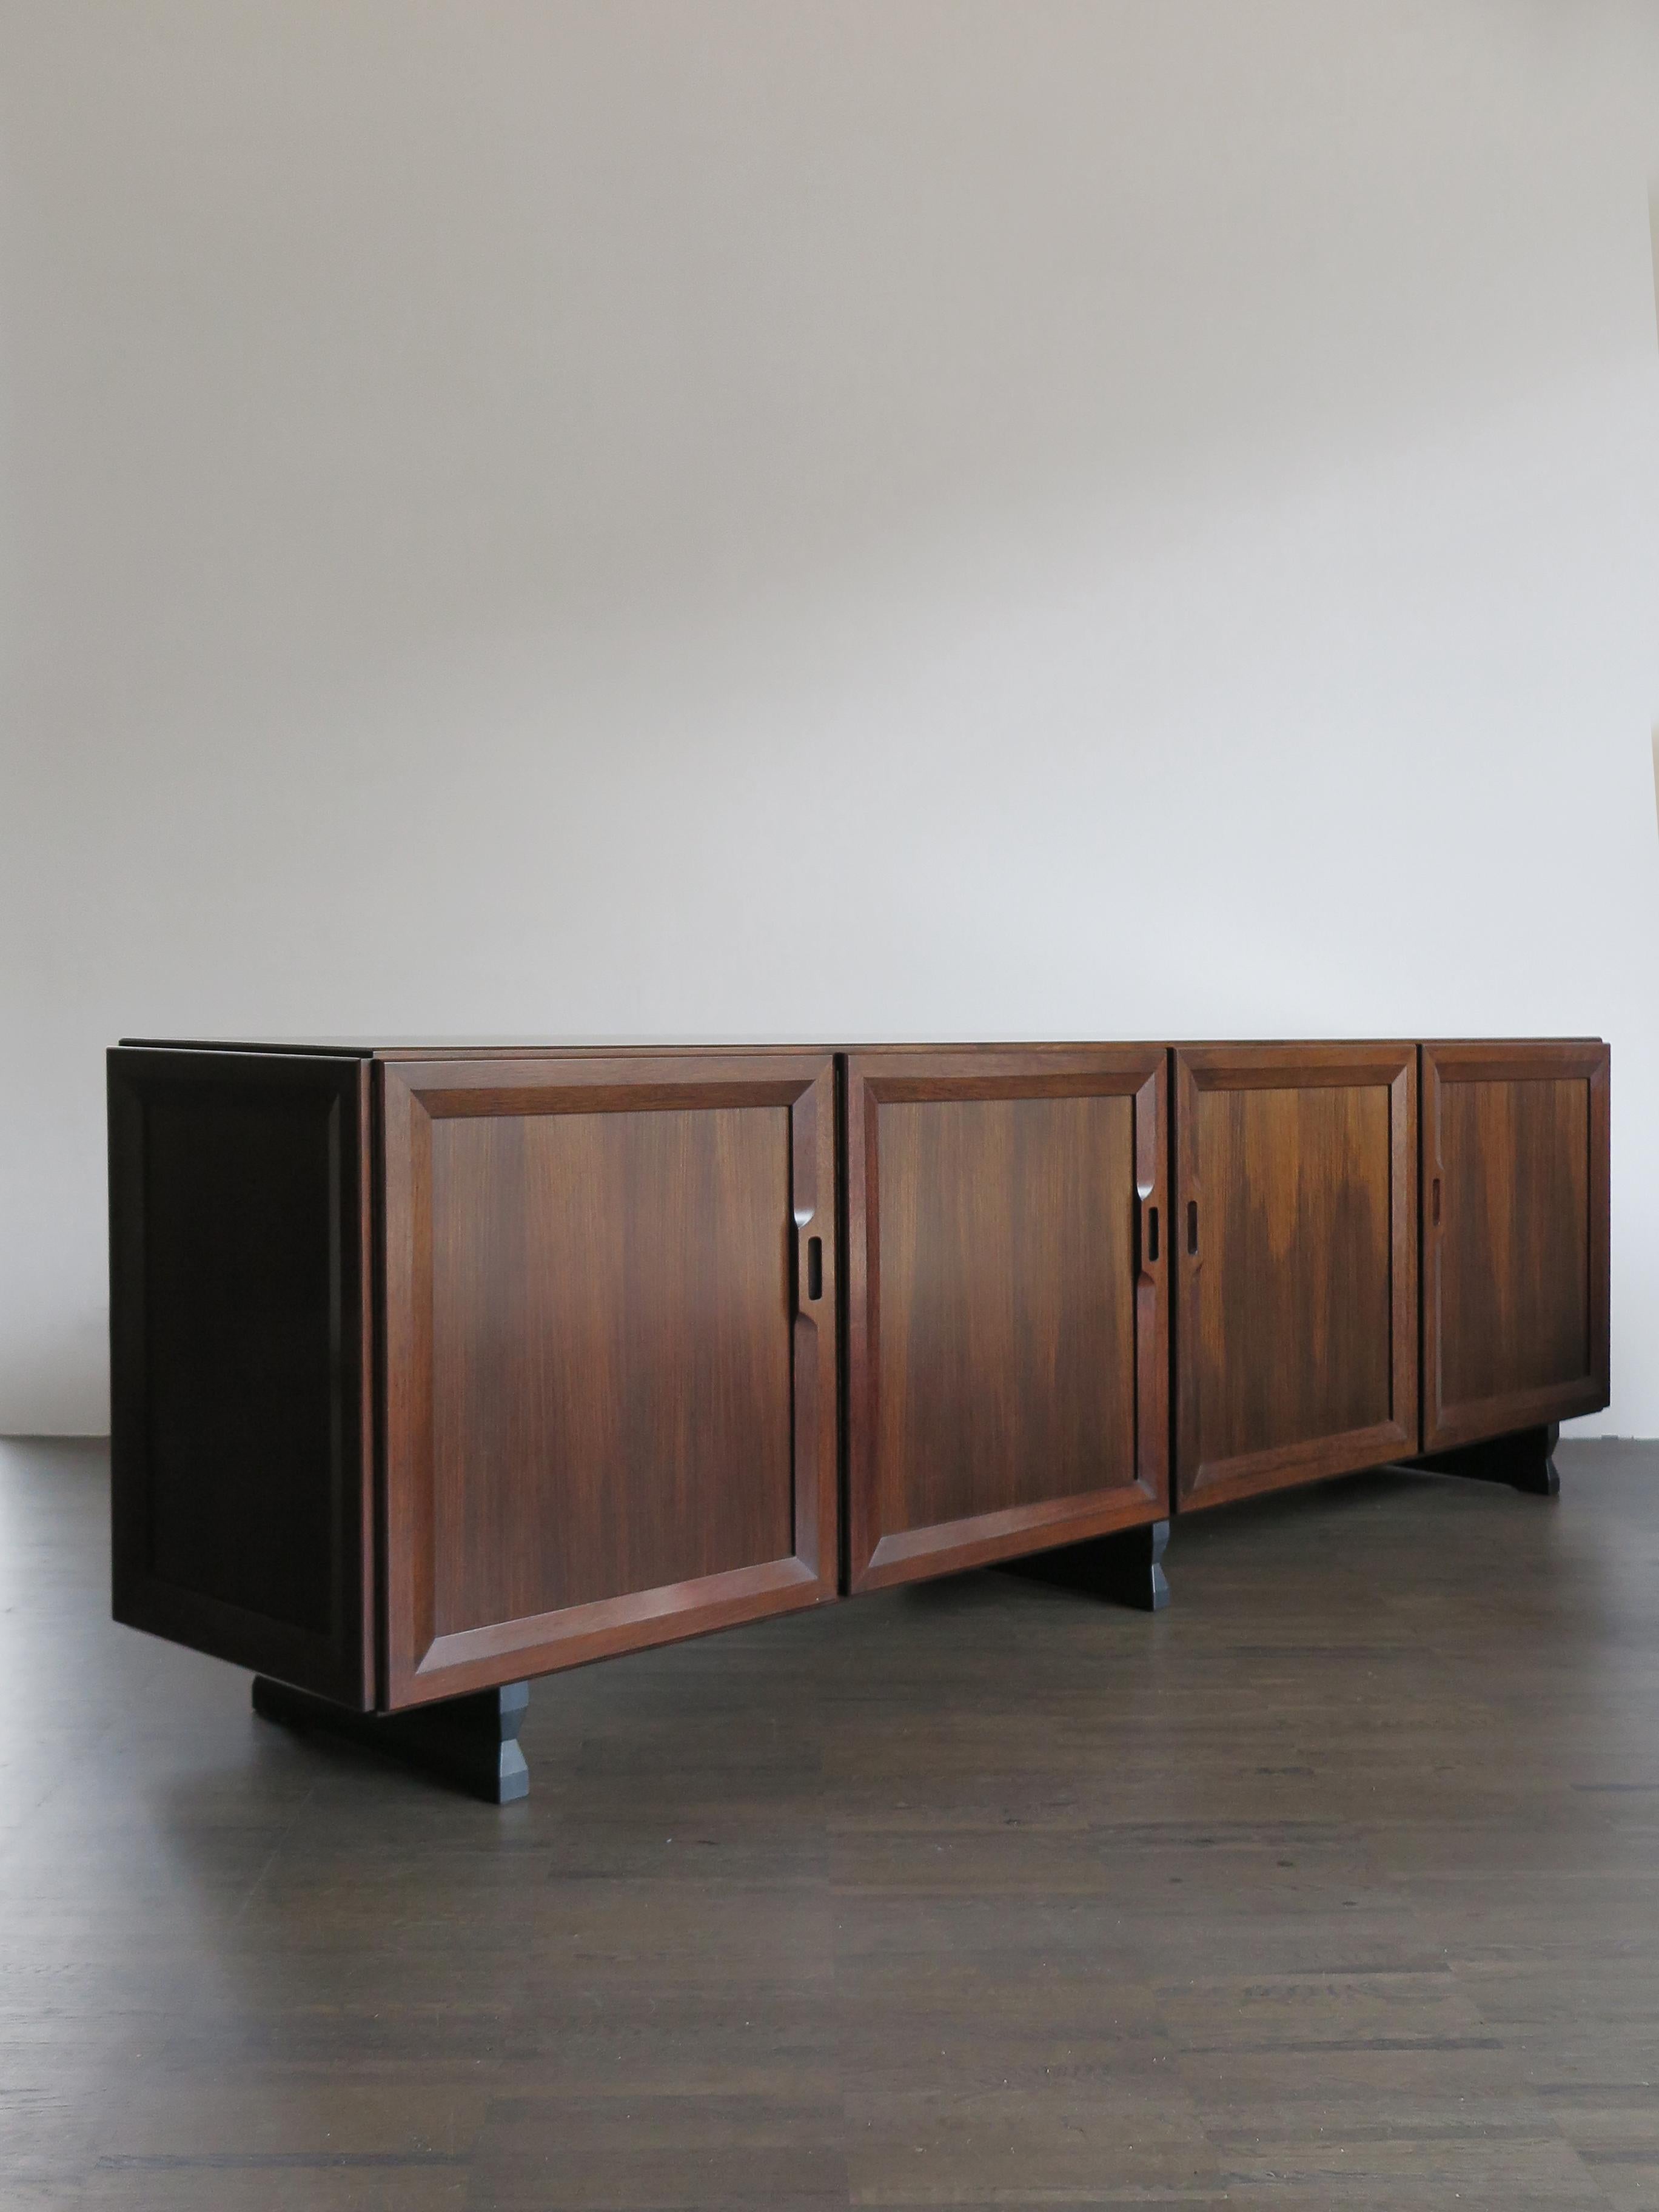 Italian rare and famous dark wood sideboard model MB15 designed by Franco Albini and produced by Poggi Pavia from 1950.
Wood veneer, feet, door frames and details in solid wood, 1950s

Bibliography:
G. Gramigna, Italian Design 1950 - 2000, Vol